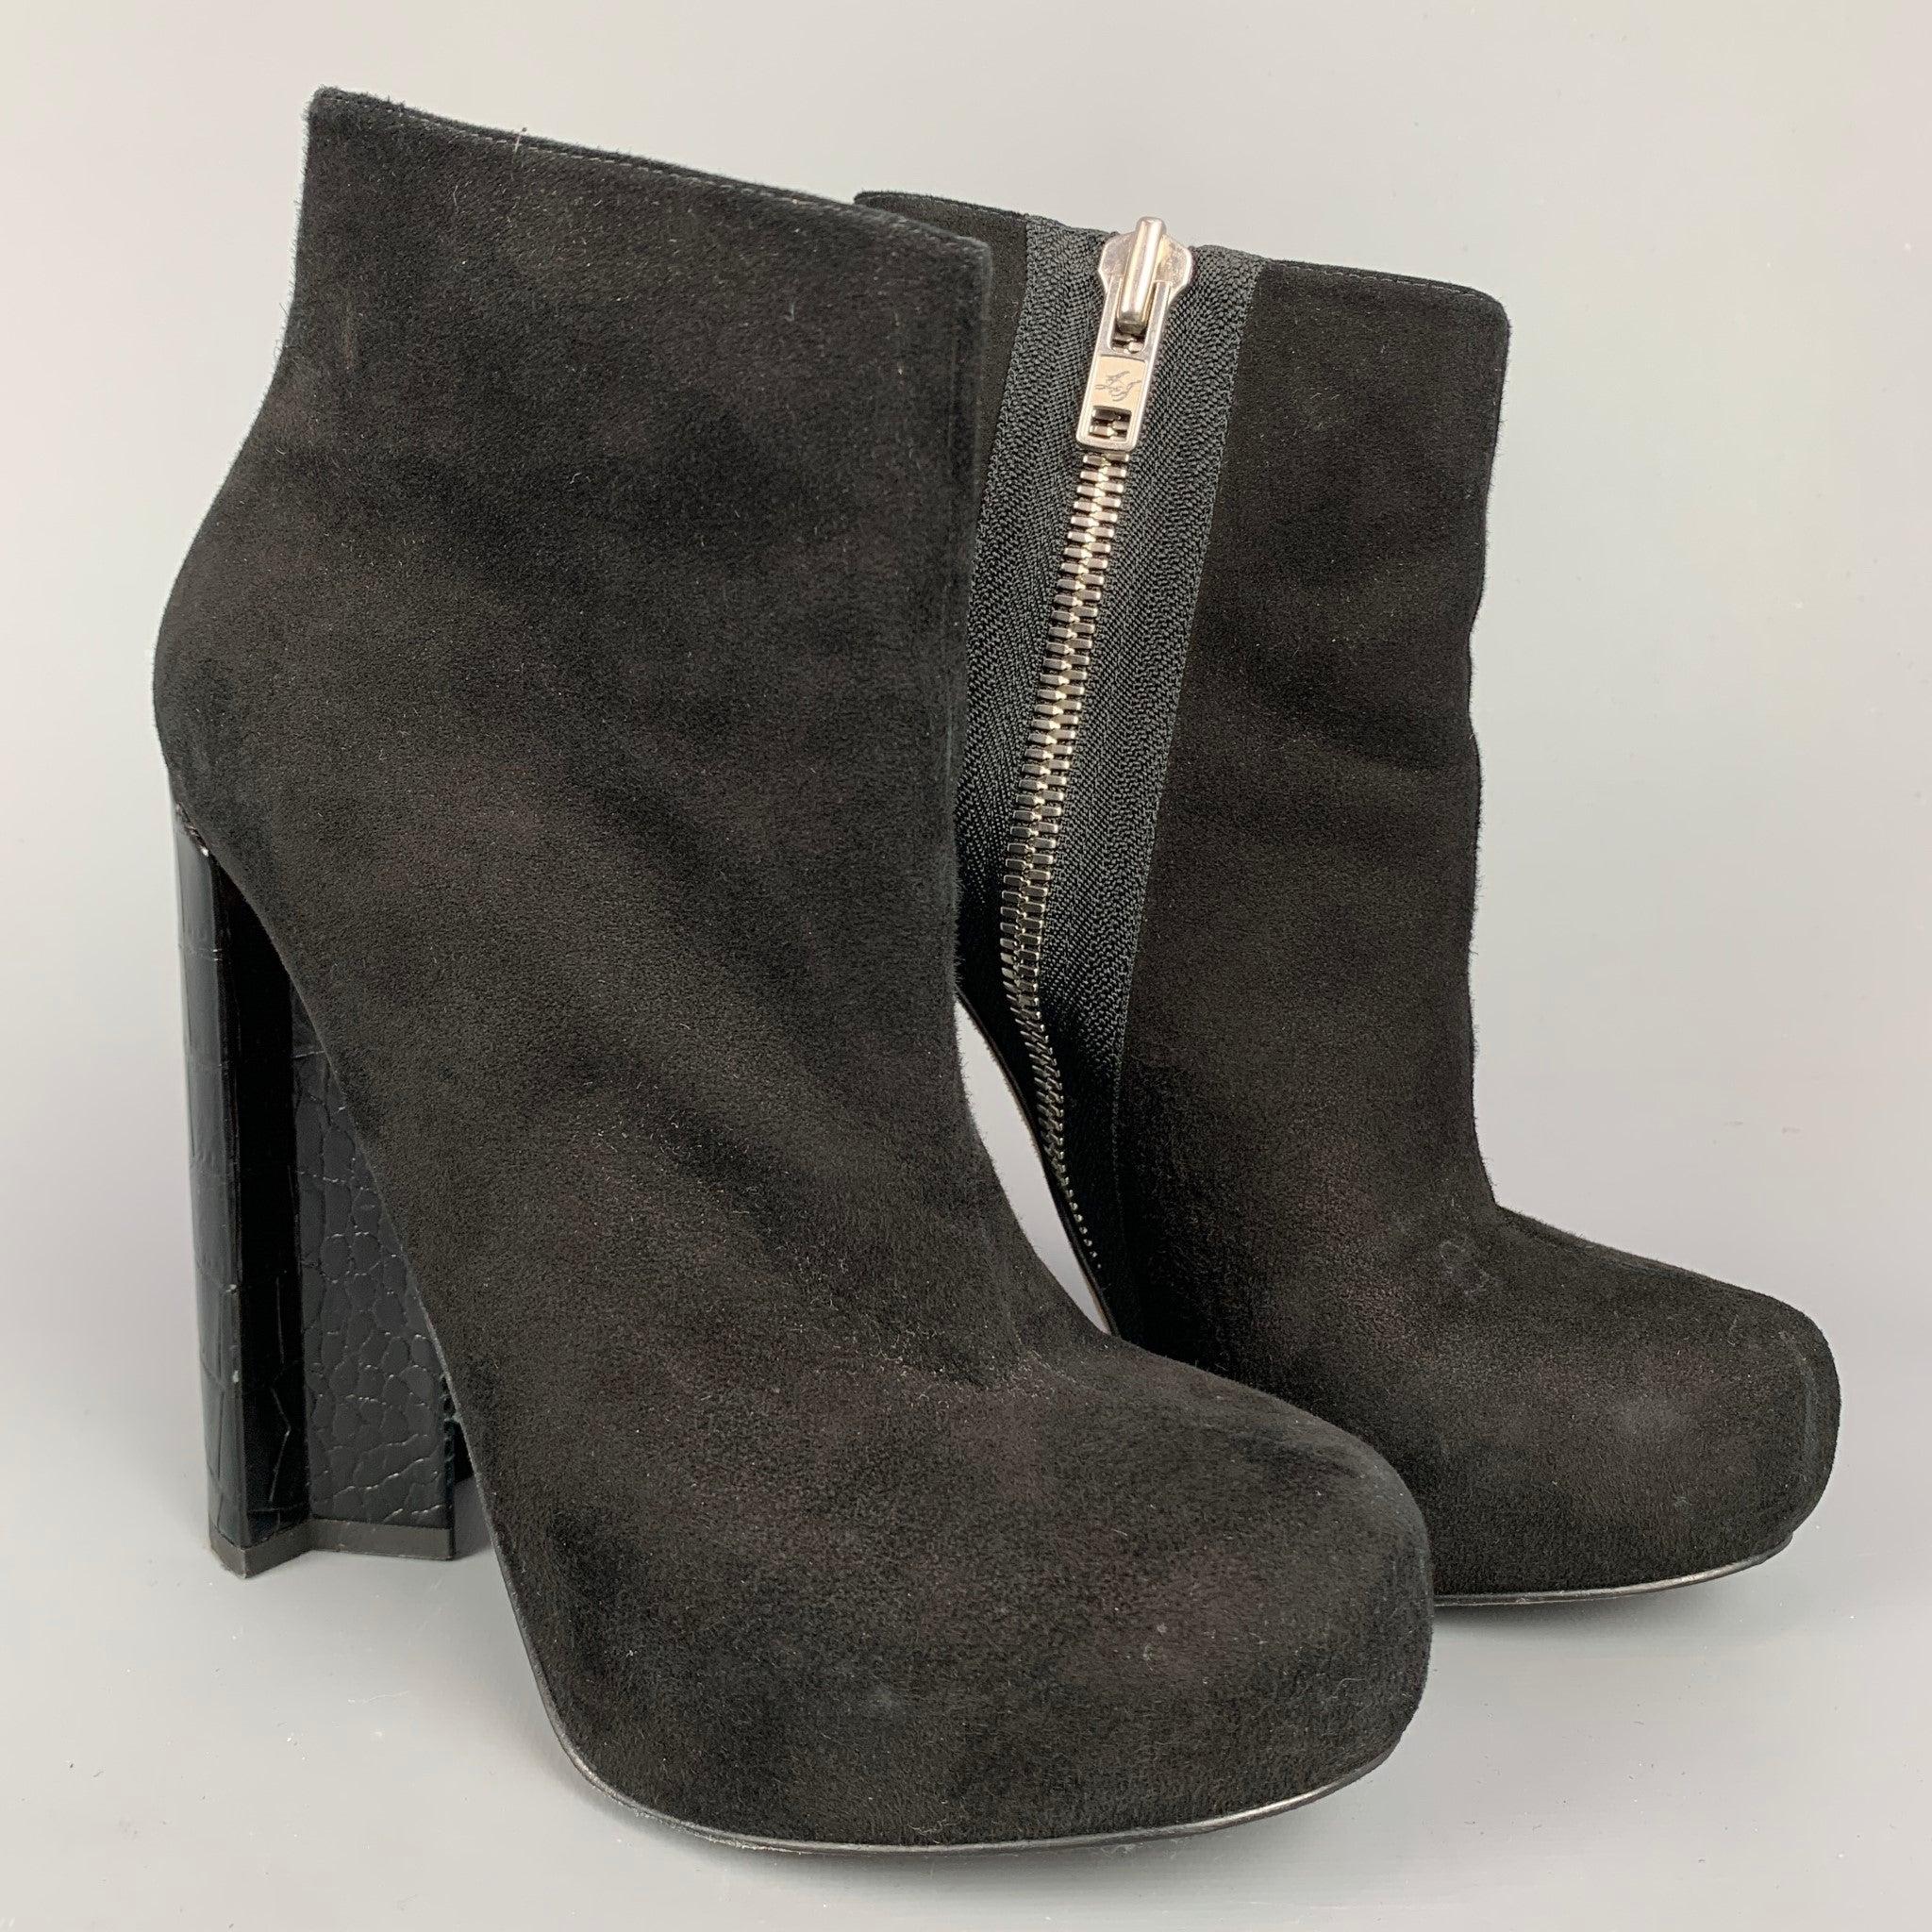 ALEJANDRO INGELMO ankle boots comes in a black suede featuring a platform style, chunky heel, and a side zipper closure.
Very Good
Pre-Owned Condition. Light wear at heel. 

Marked:   36.5  

Measurements: 
  Length: 7.5 inches  Width: 2.5 inches 